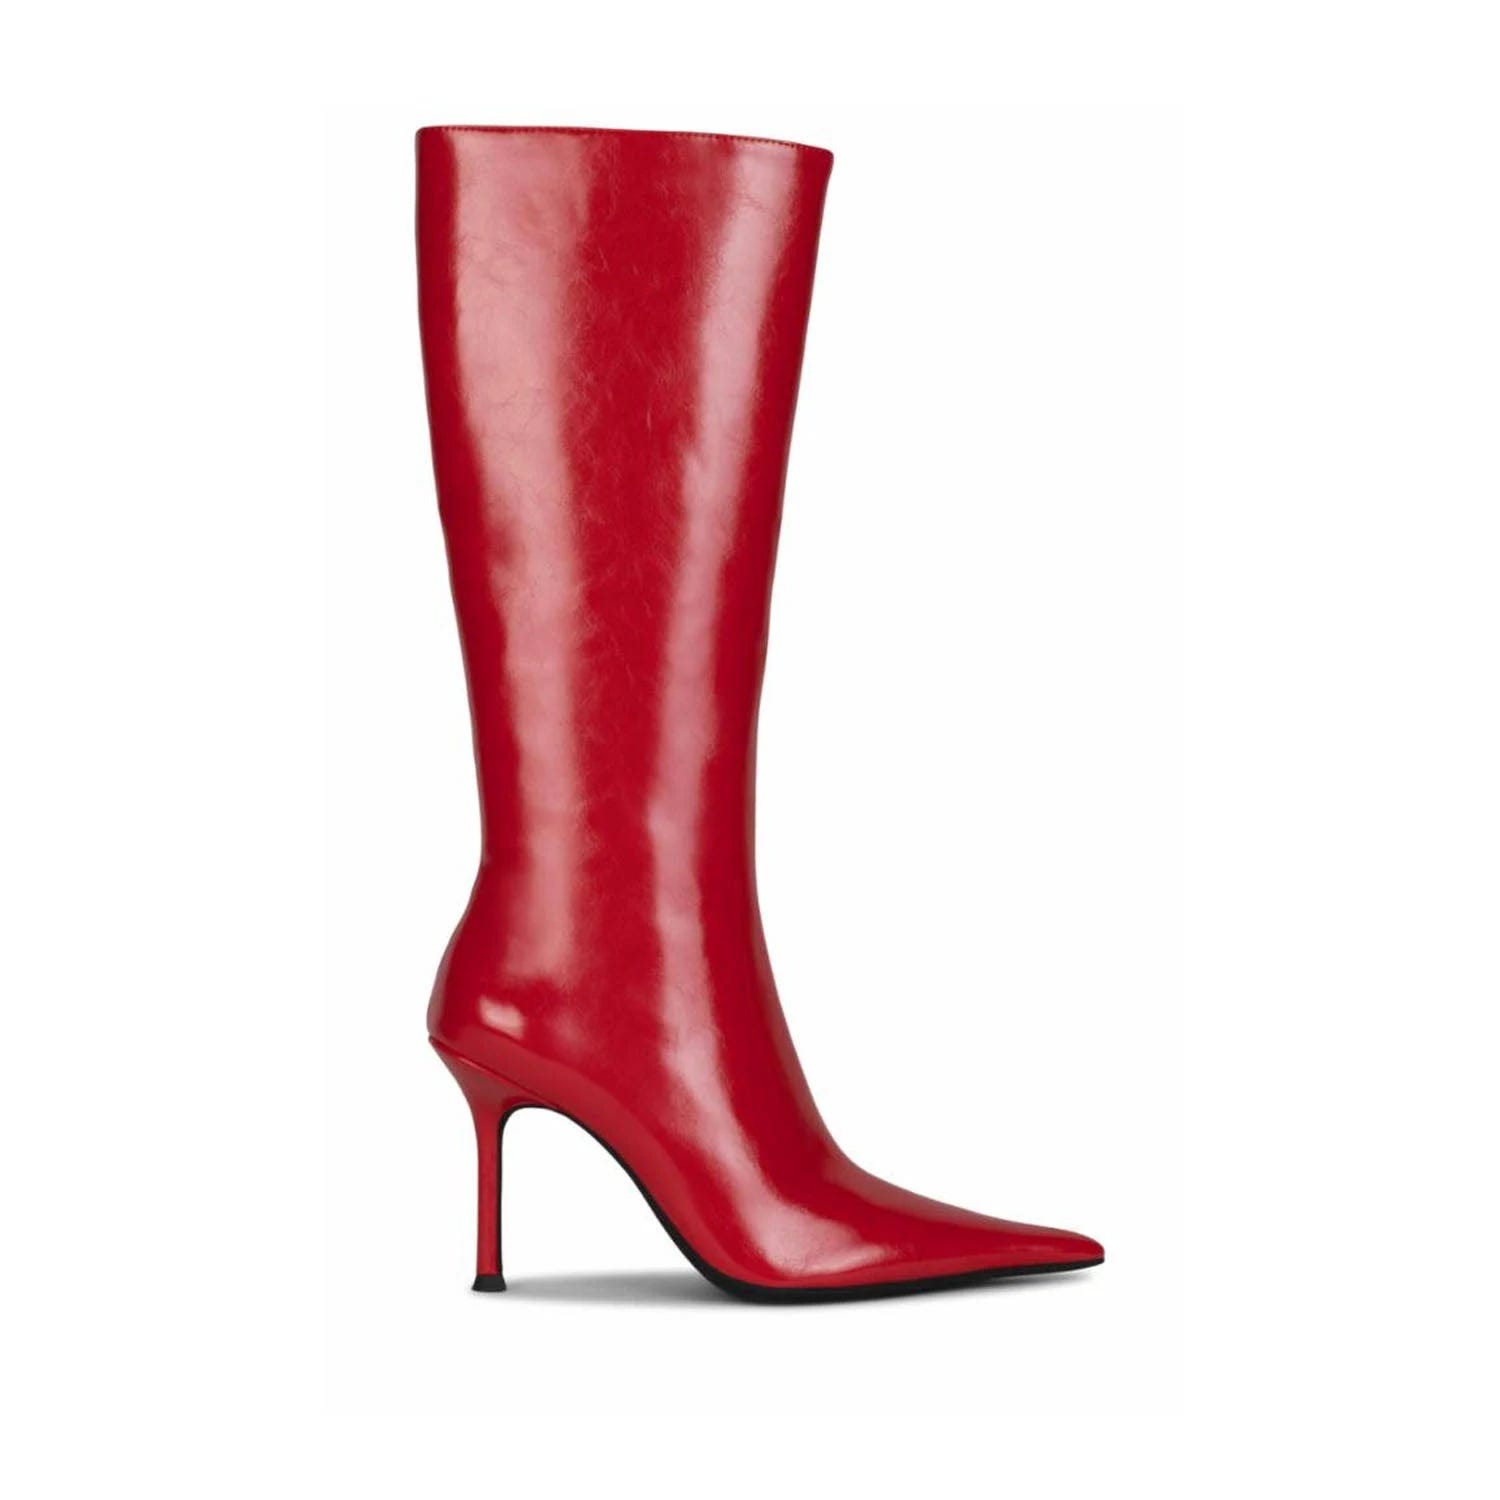 Pointed-Toe Red Boots for Stylish Party Looks | Image